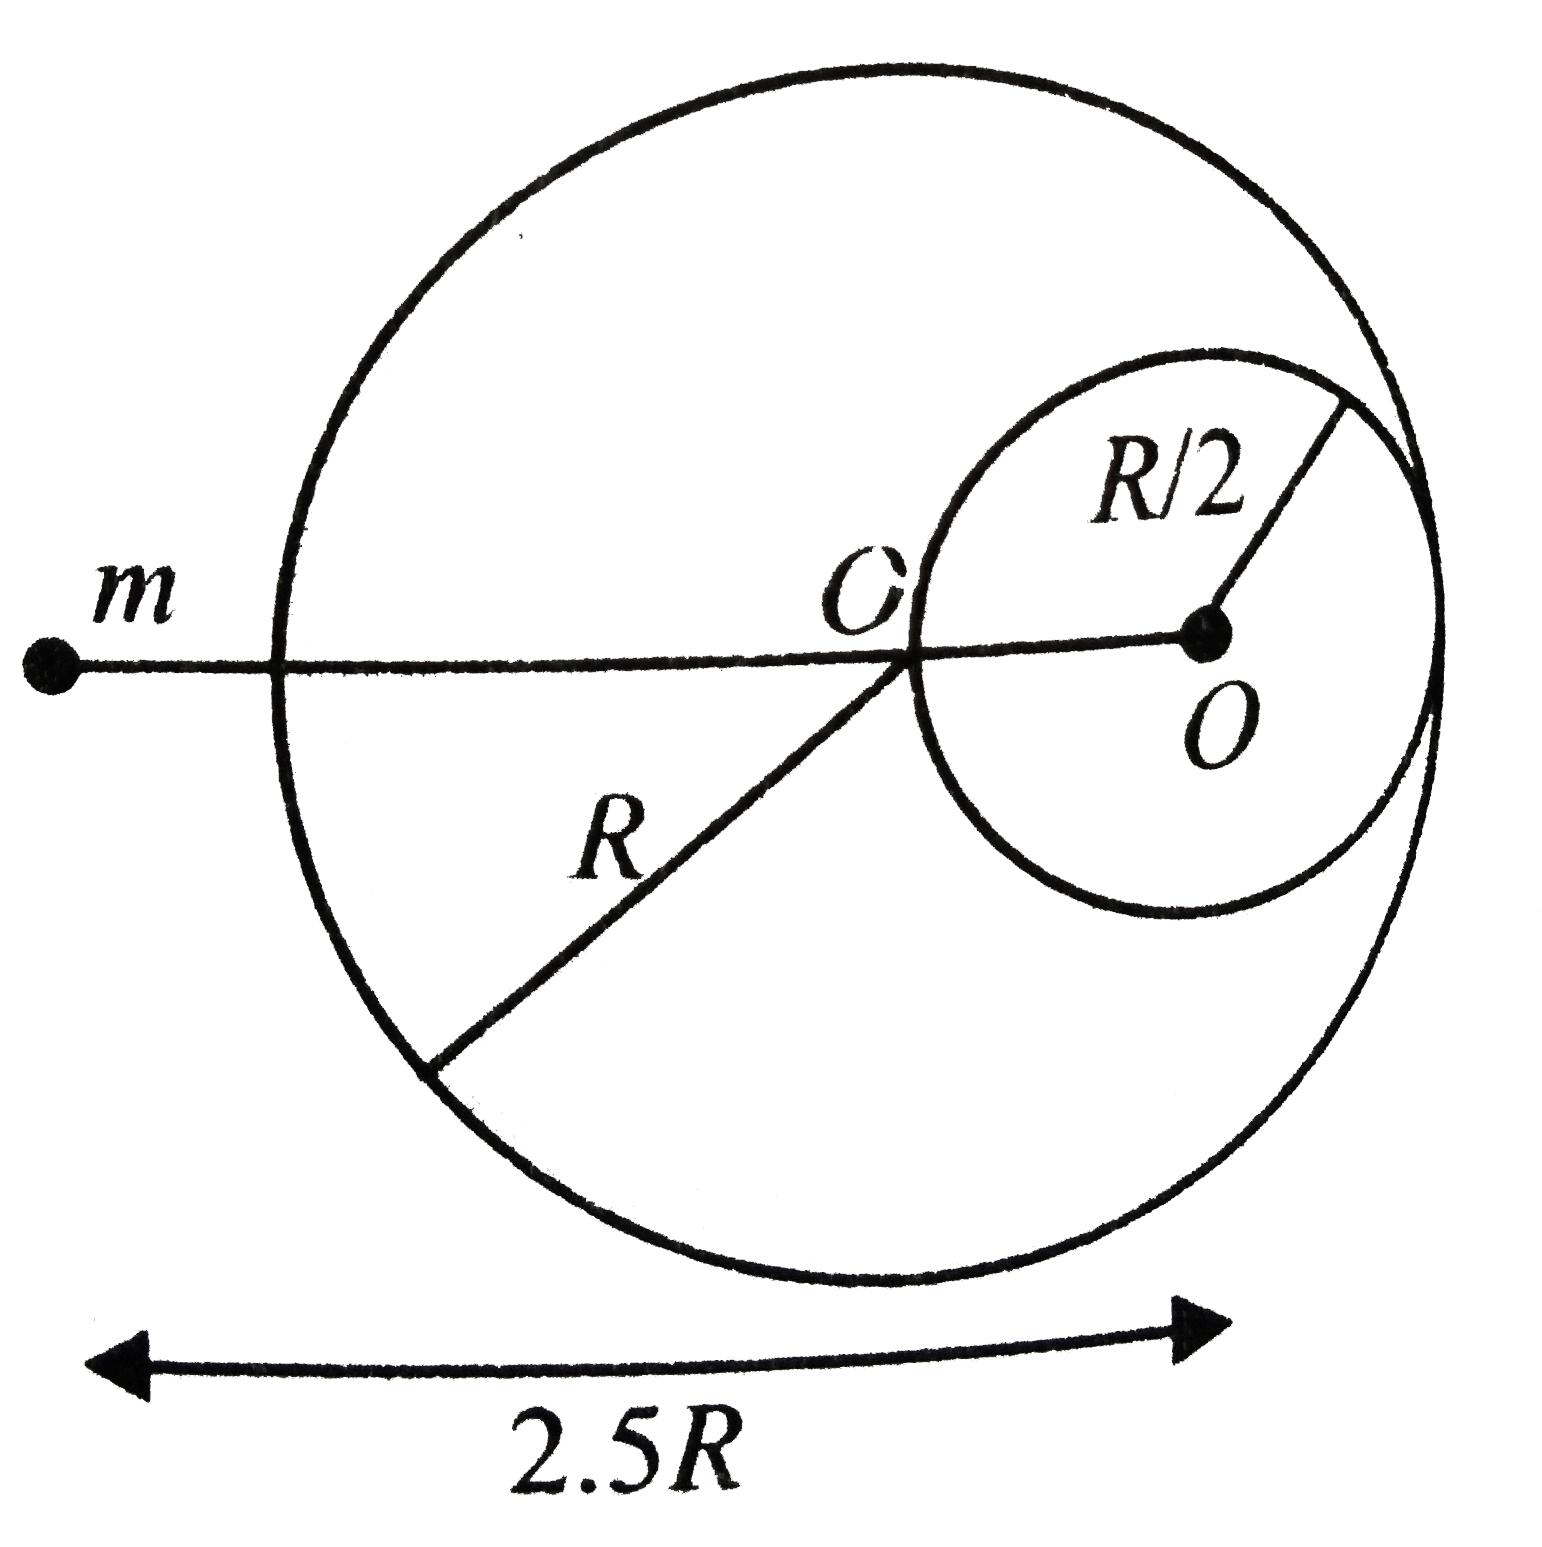 A solid sphere of radius R//2 is cut out of a solid sphere of radius R such that the spherical cavity so formed touches the surface on one side and the centre of the sphere on the other side, as shown. The initial mass of the solid sphere was M. If a particle of mass m is placed at a distance 2.5R from the centre of the cavity, then what is the gravitational attraction on the mass m?